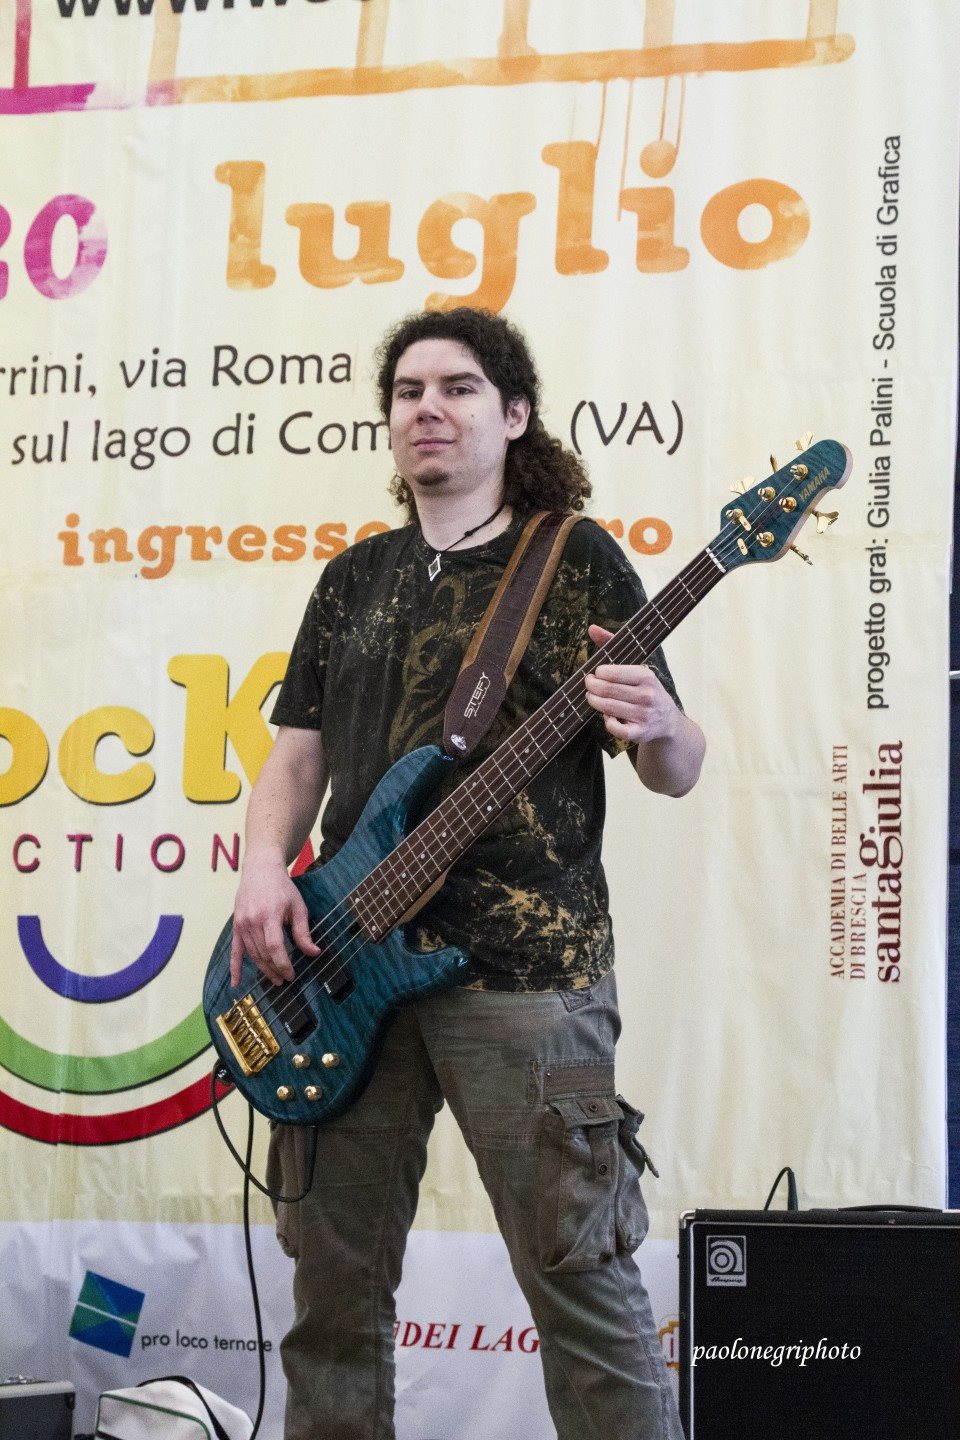 WOODinSTOCK 2014 - Day Four by Paolo Negri